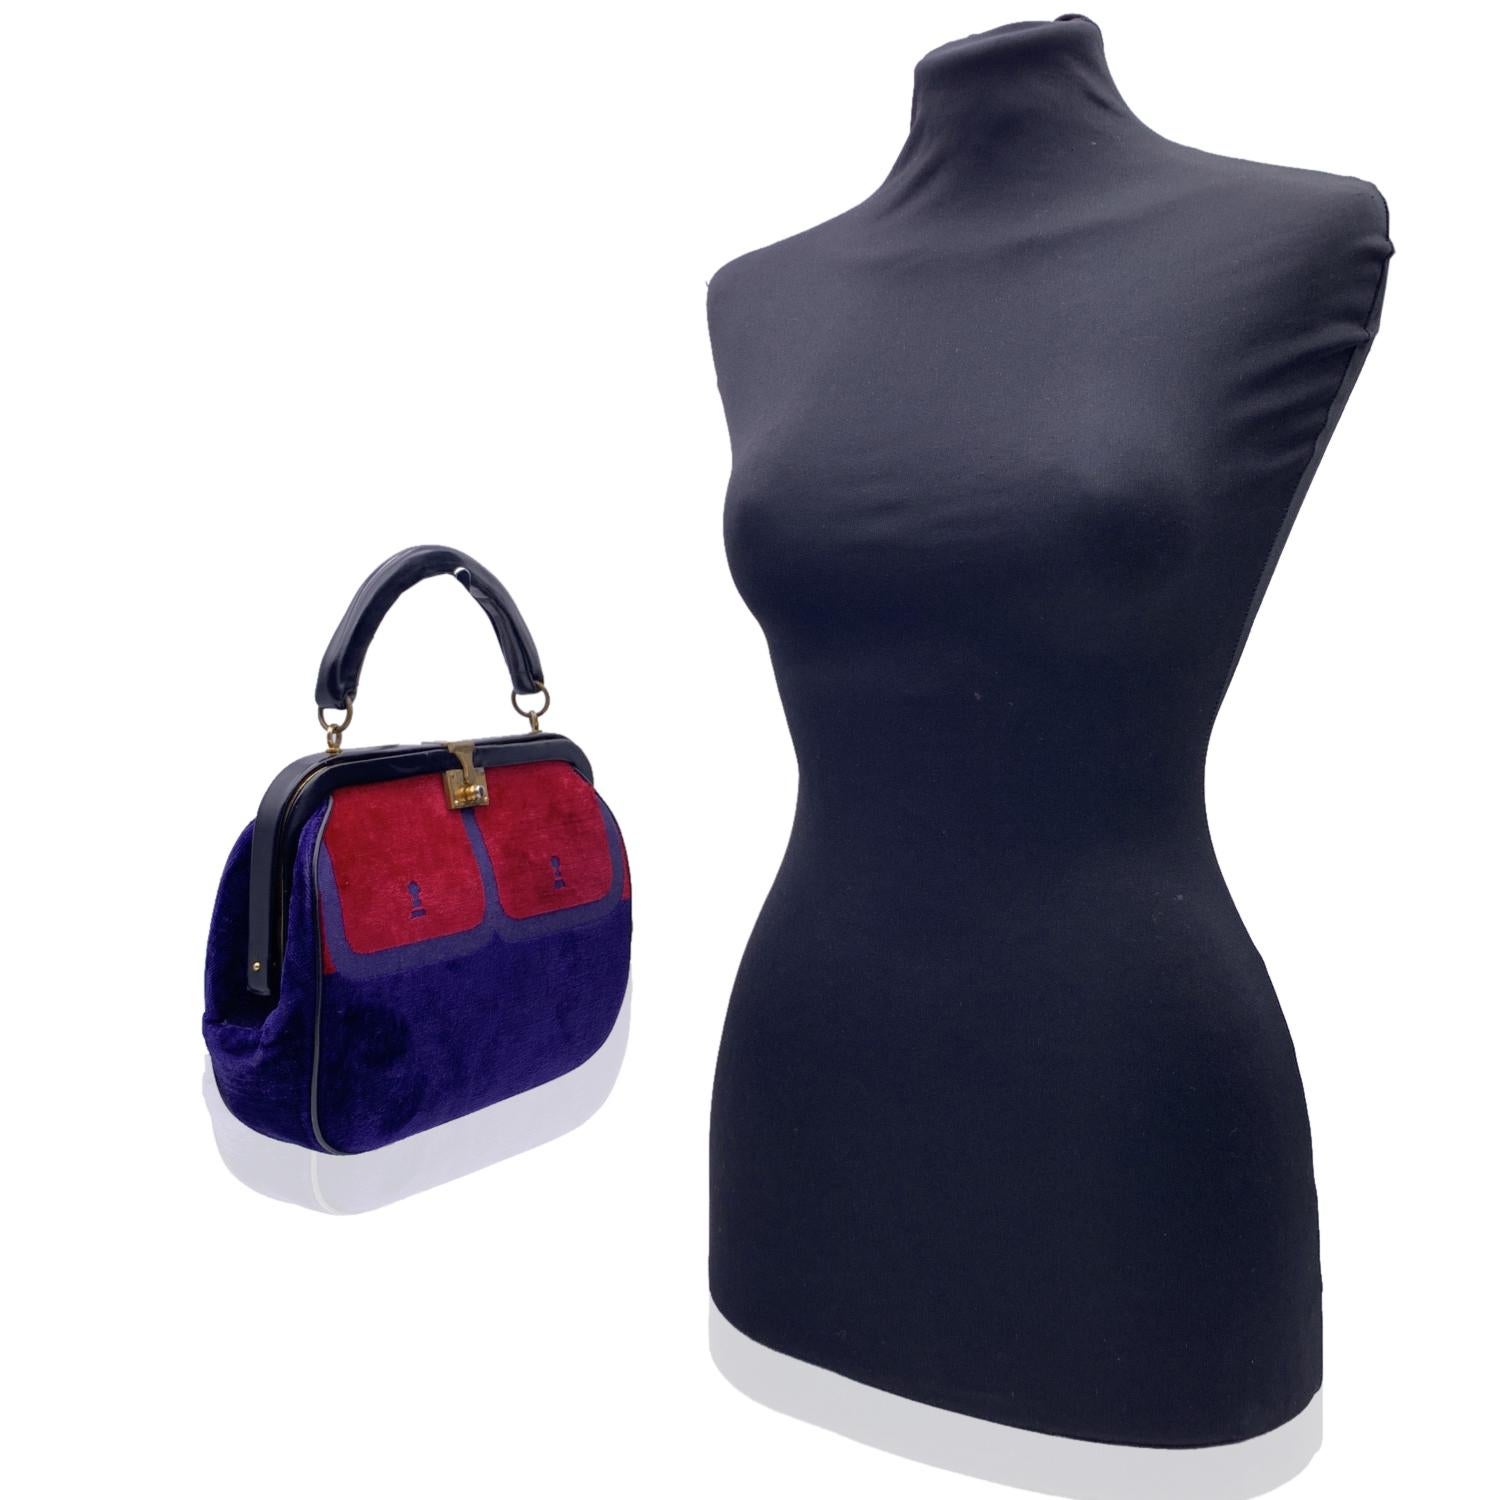 ROBERTA DI CAMERINO velvet handbag. Classic style in blue and red velvet with black leather frame and handle. Gold metal hardware. It features a leather top-handle and a front clasp closure. Leather lining. 2 side open pockets and 1 side zip pocket